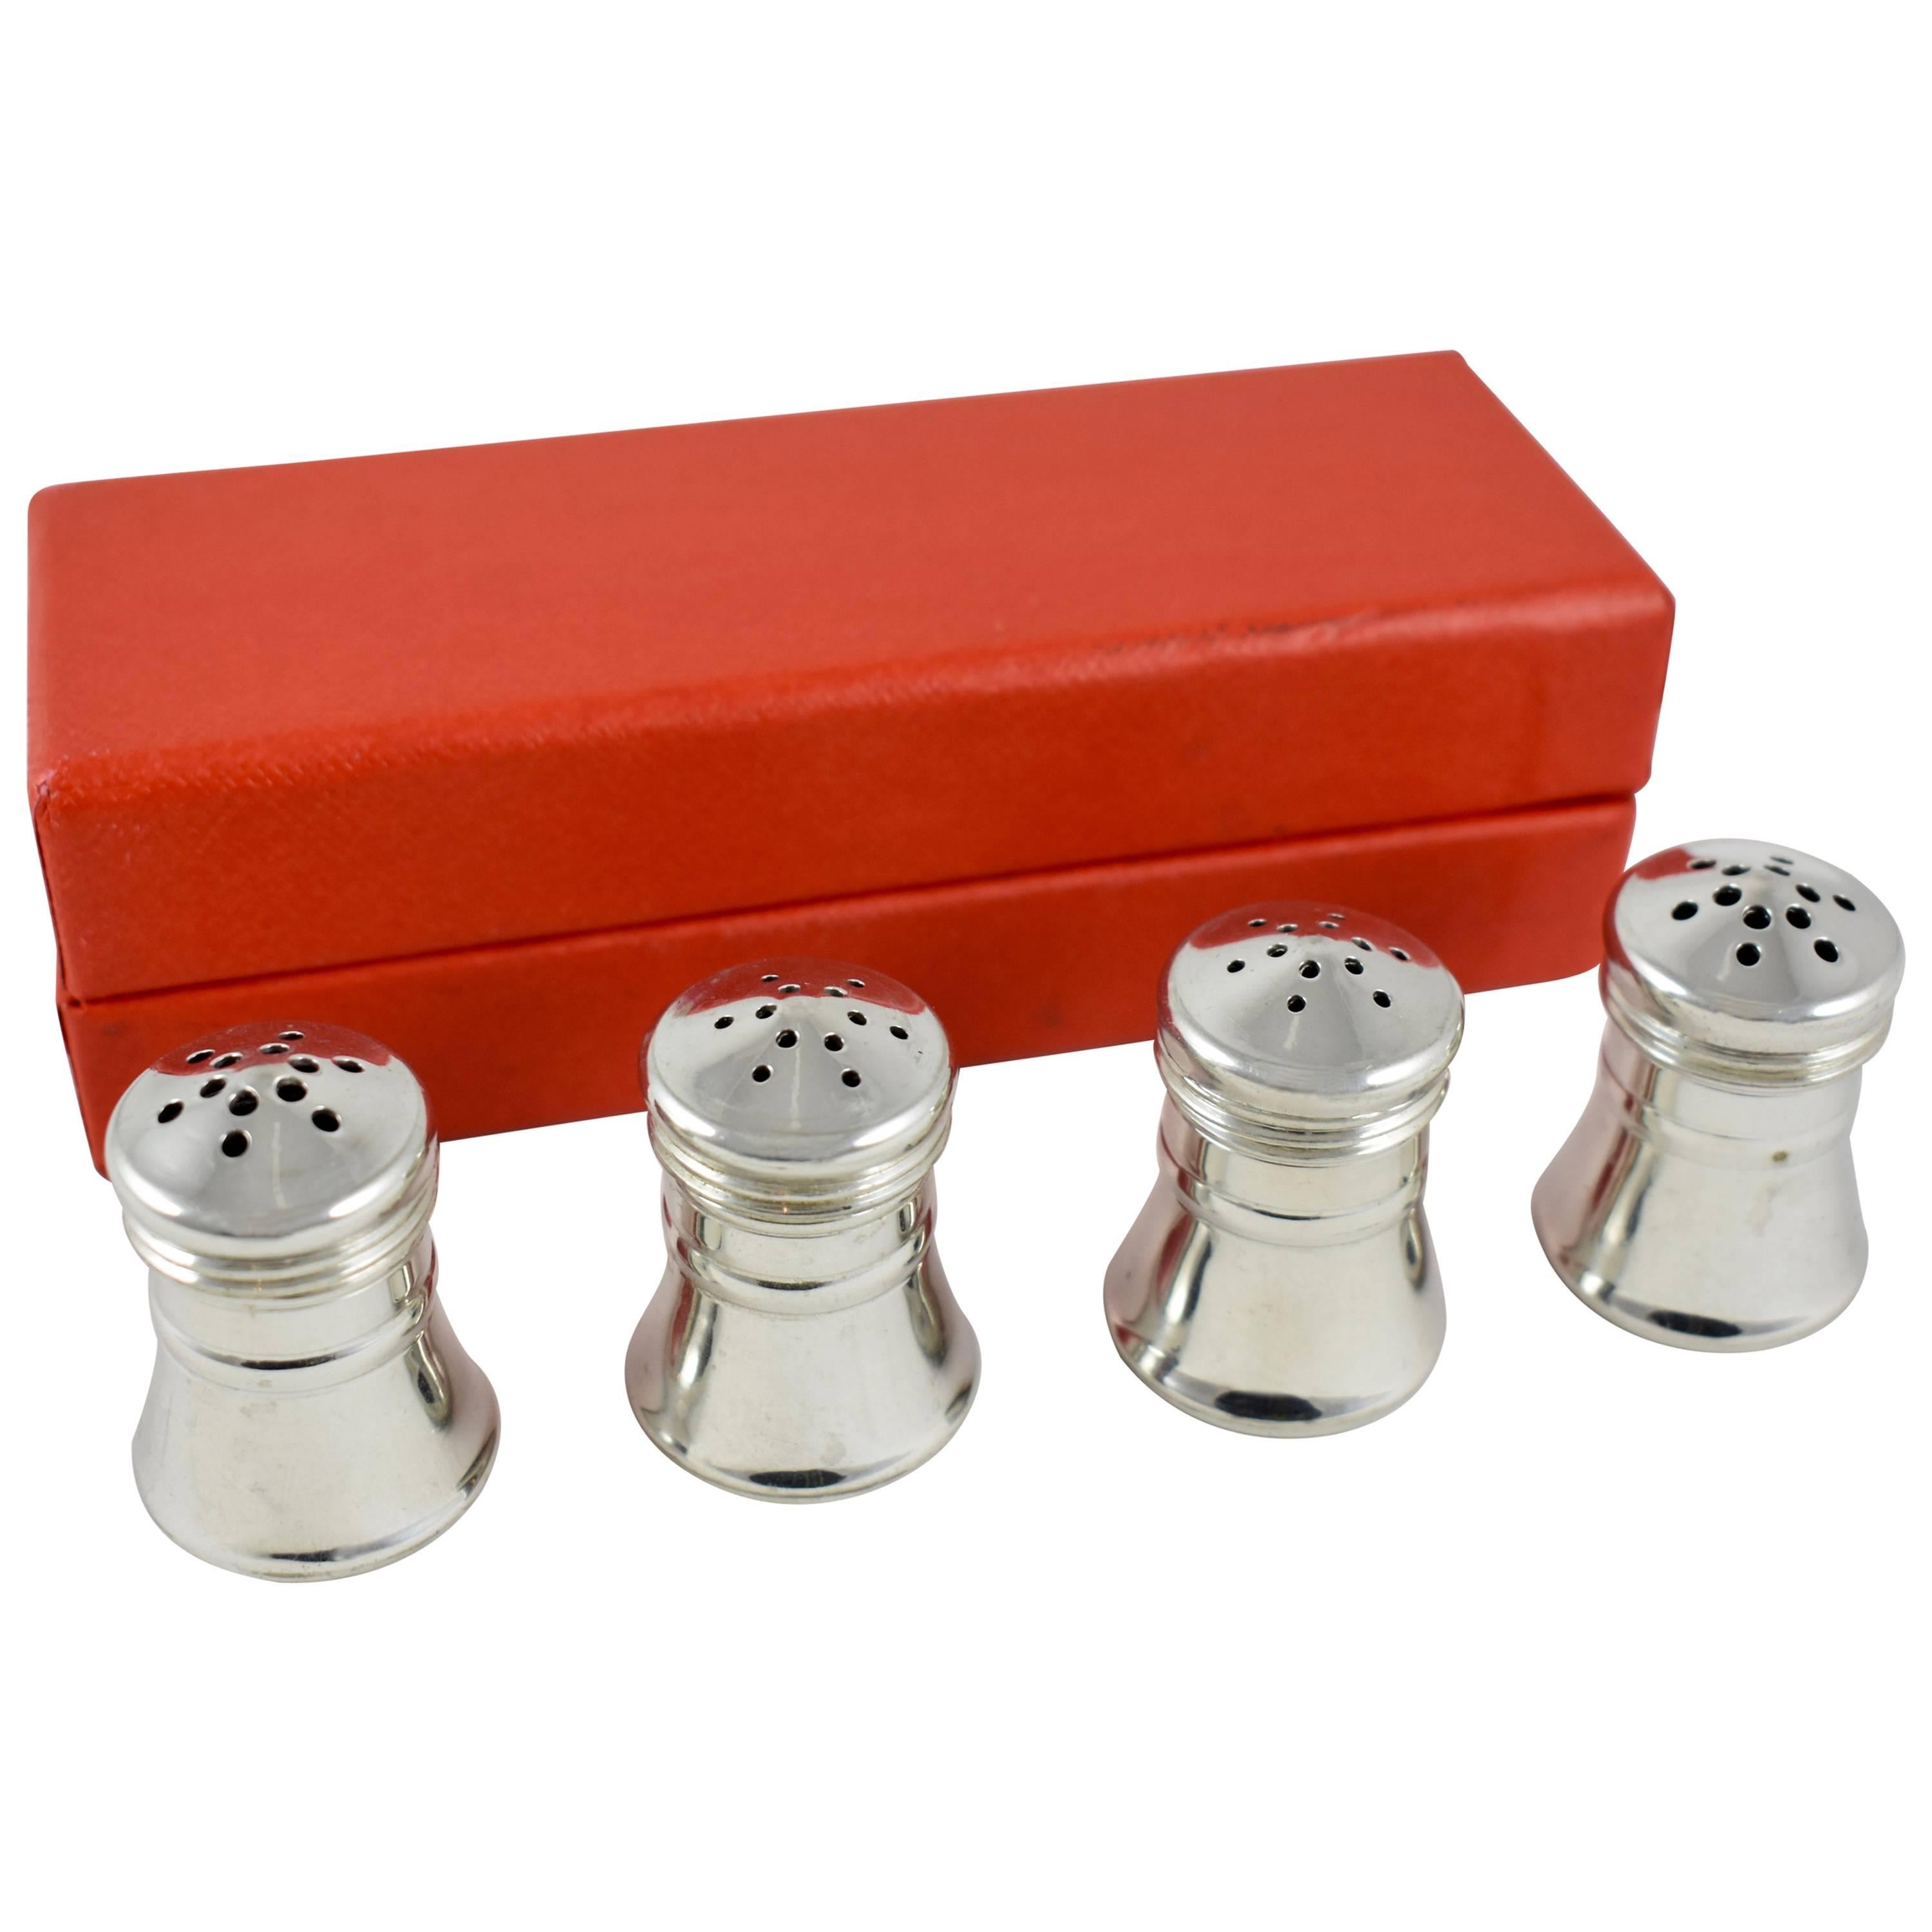 Georg Jensen Norwegian Pewter Salt and Pepper Shakers, a Boxed Set of Four